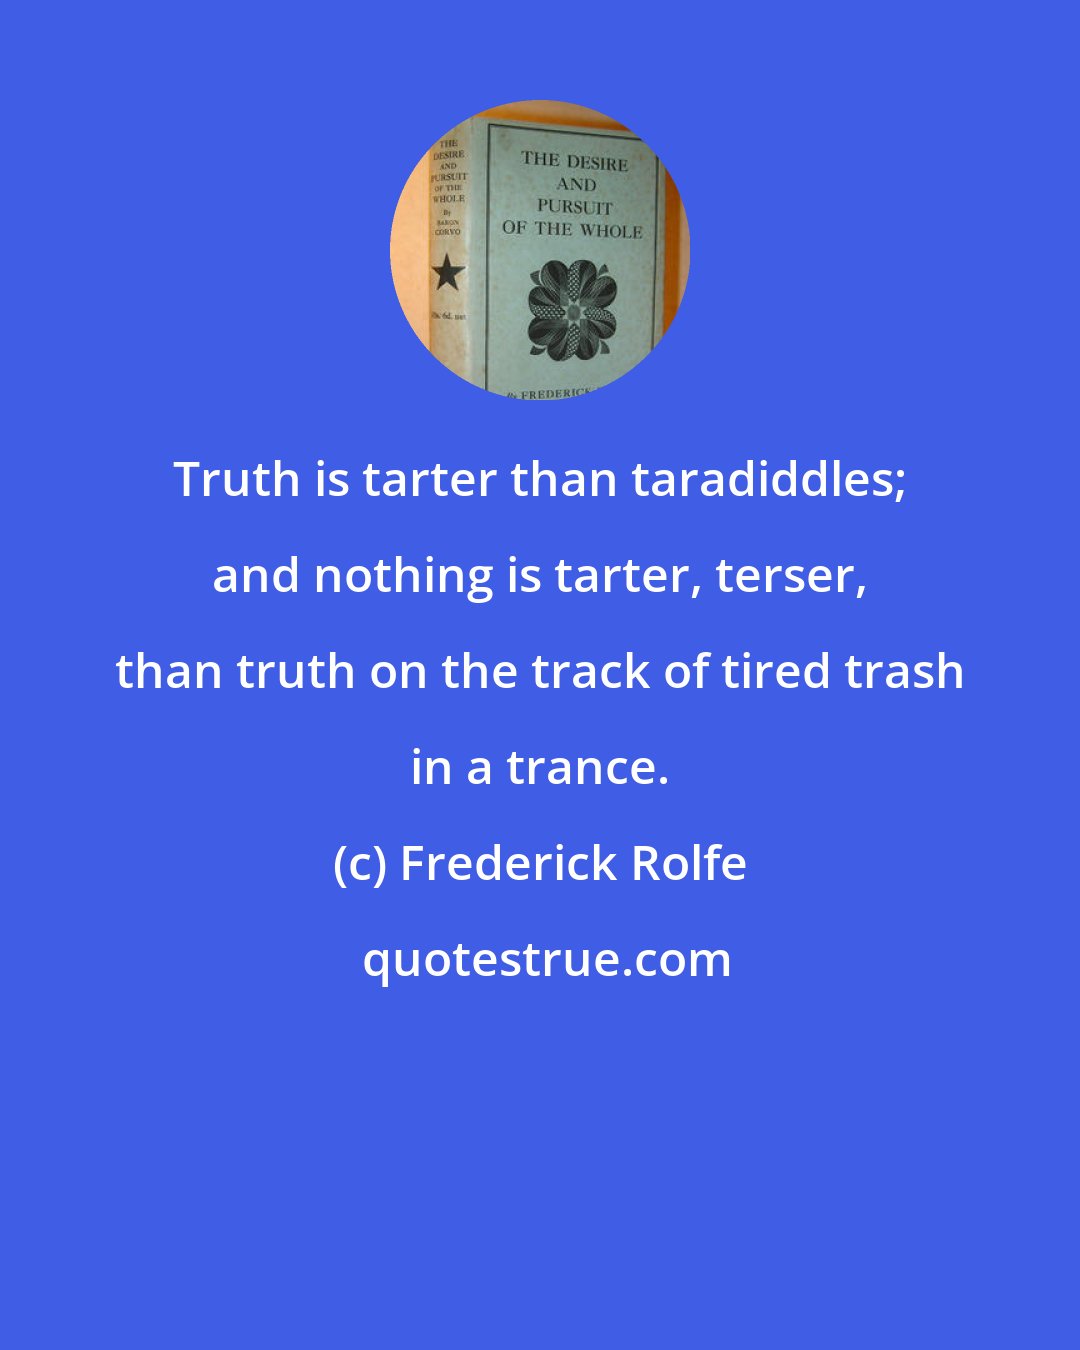 Frederick Rolfe: Truth is tarter than taradiddles; and nothing is tarter, terser, than truth on the track of tired trash in a trance.